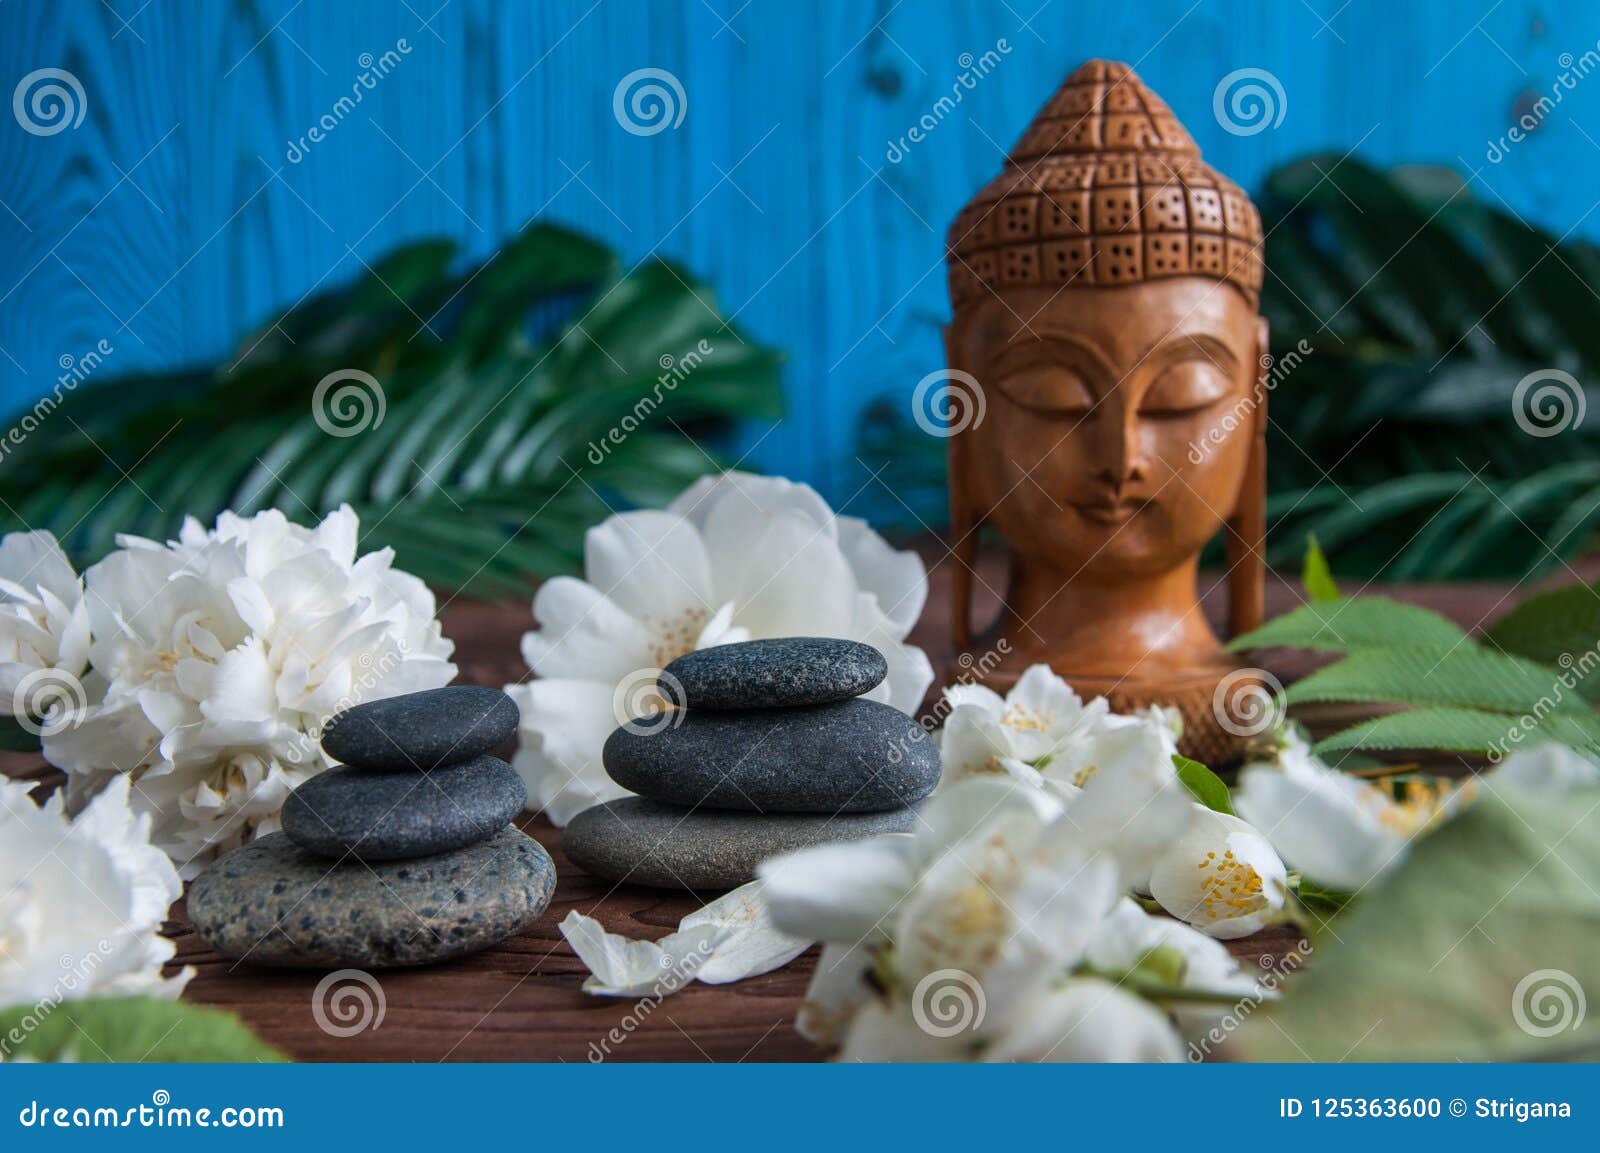 Pyramids of Gray Zen Stones with White Flowers, Green Leaves on Wooden ...